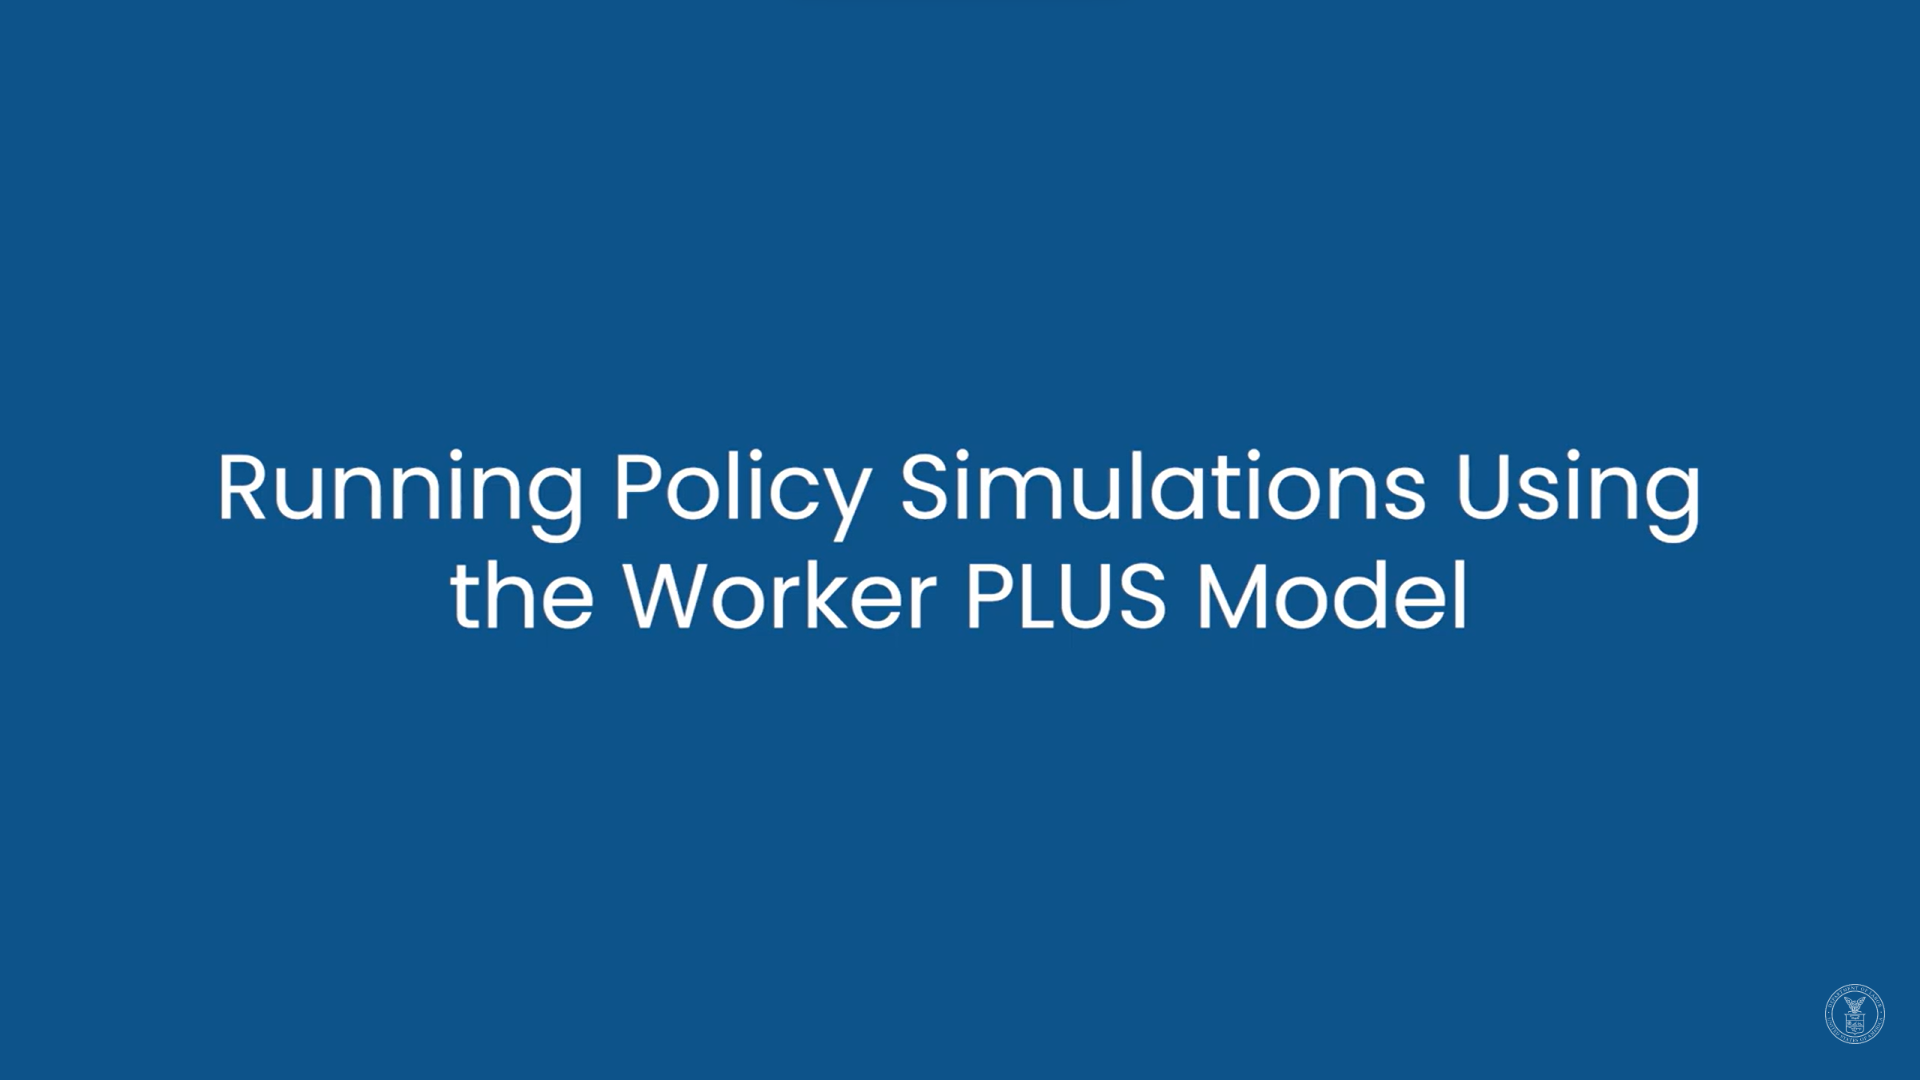 This video describes how to run policy simulations using the Worker Paid Leave Usage Simulation (or Worker PLUS) model user interface.